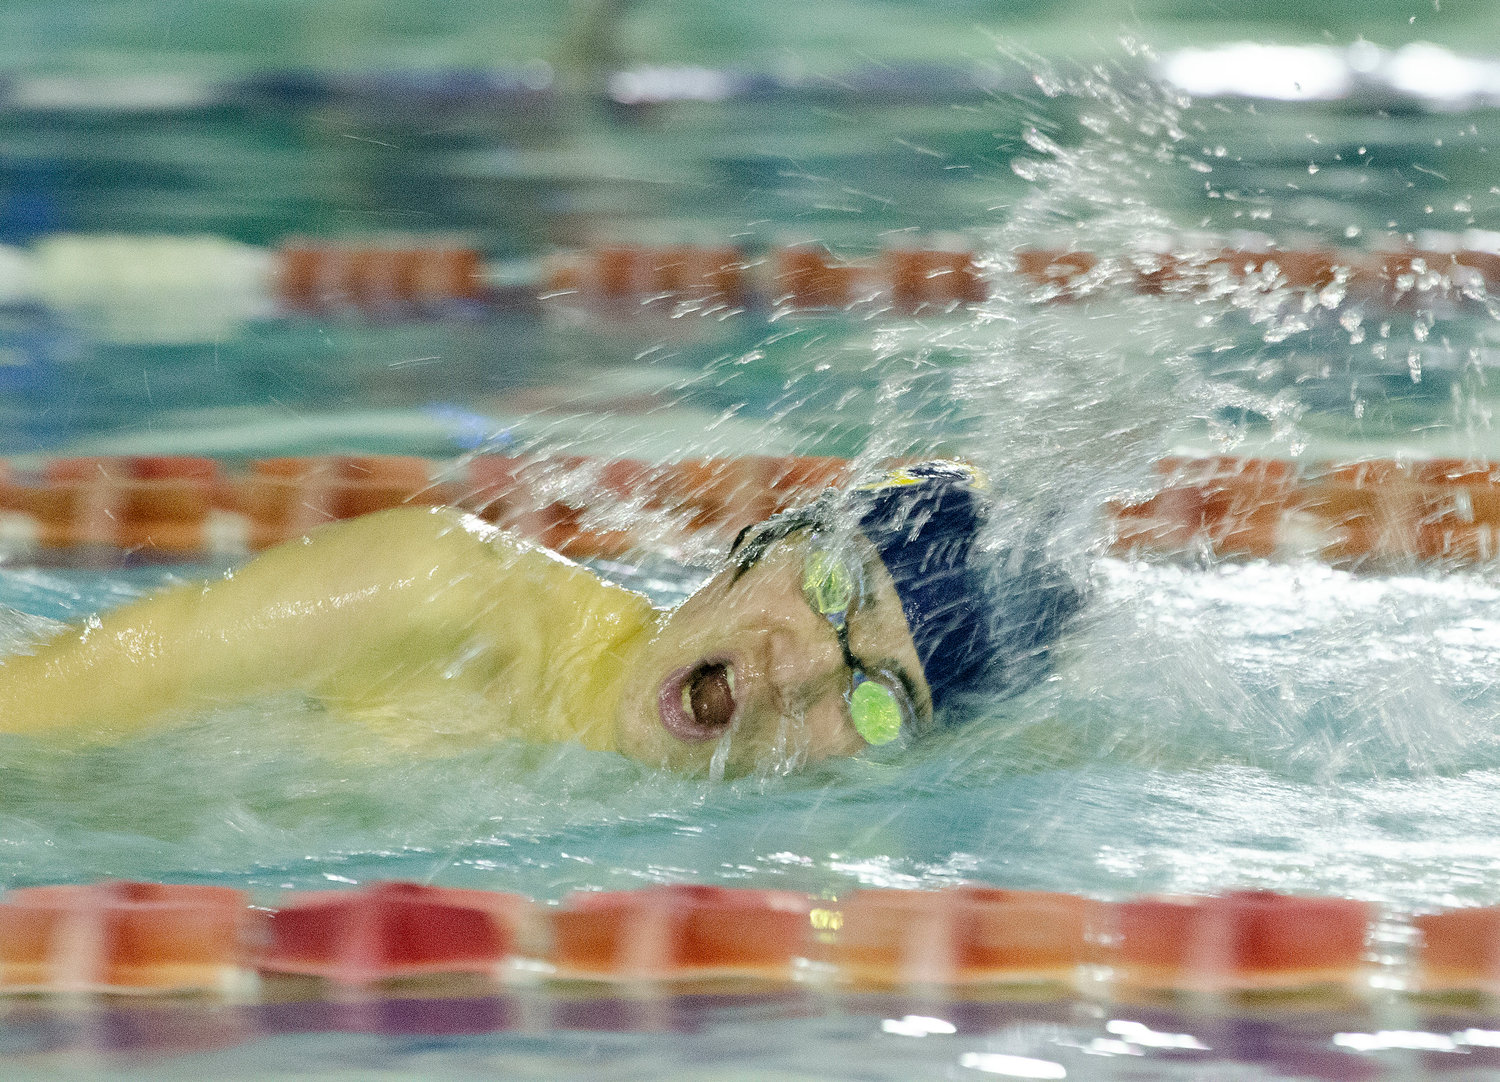 Ben Choi-Shattle races in the 500 free during Barrington's meet against Lincoln.